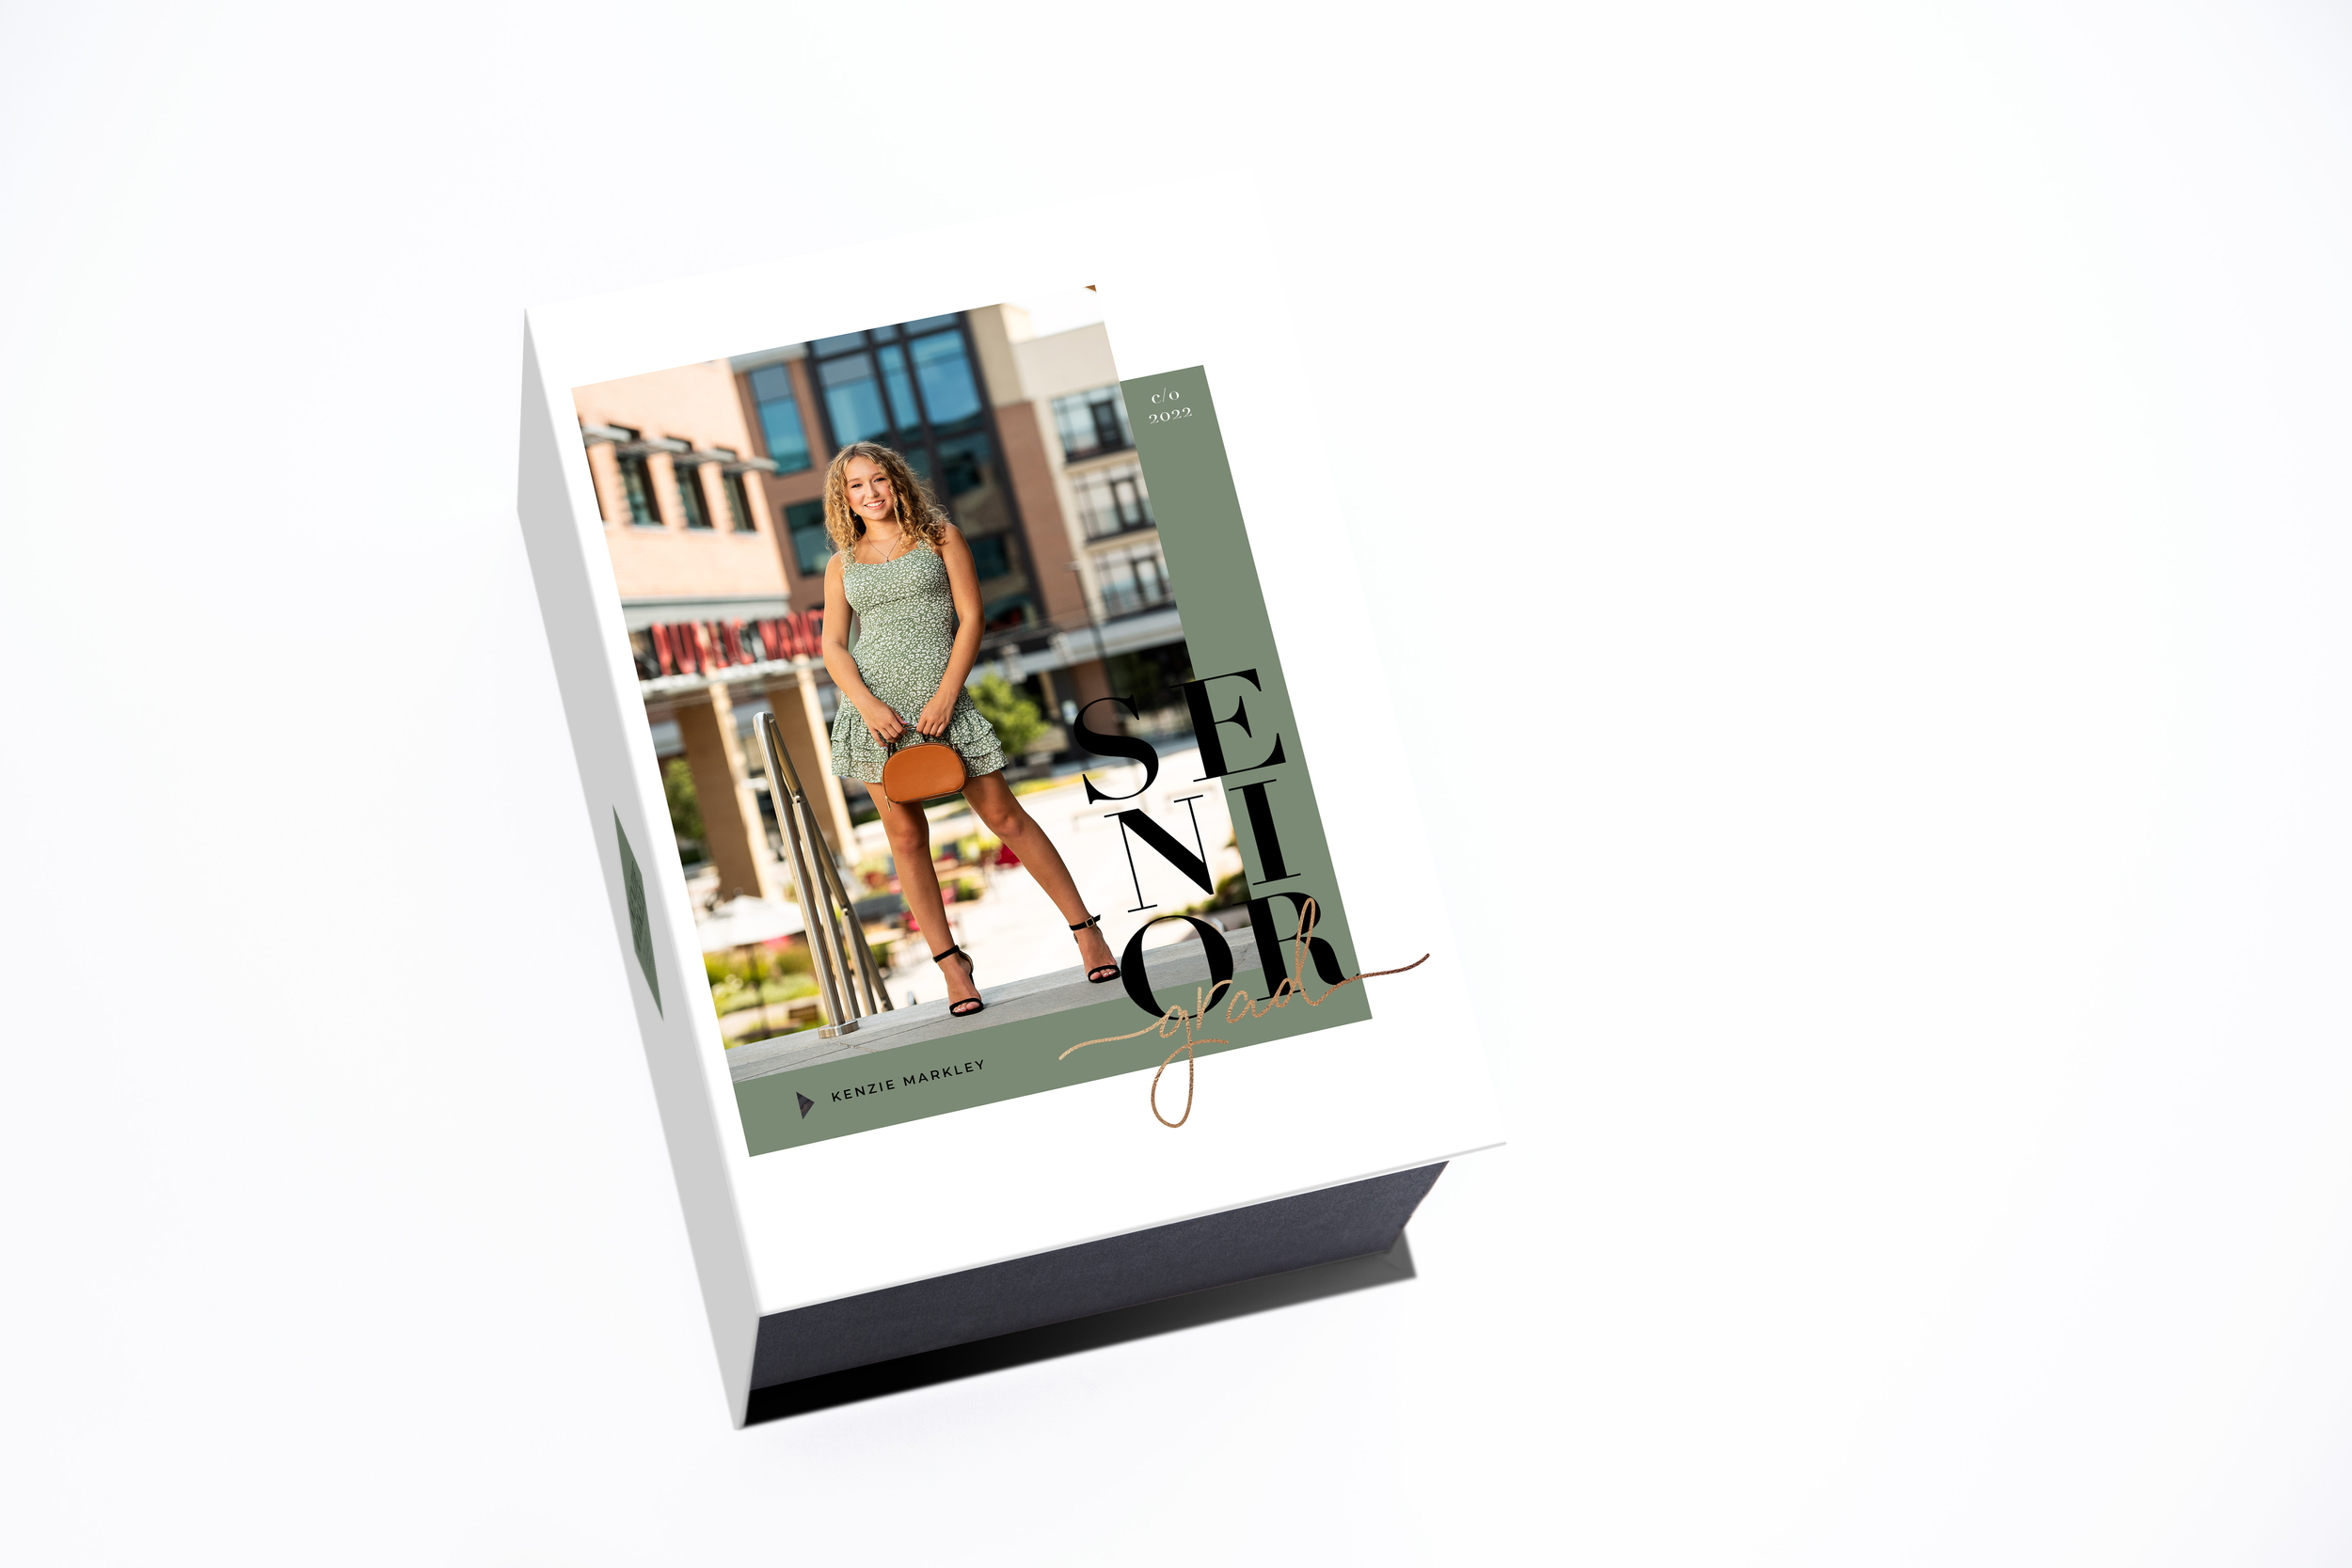  Image boxes for seniors 